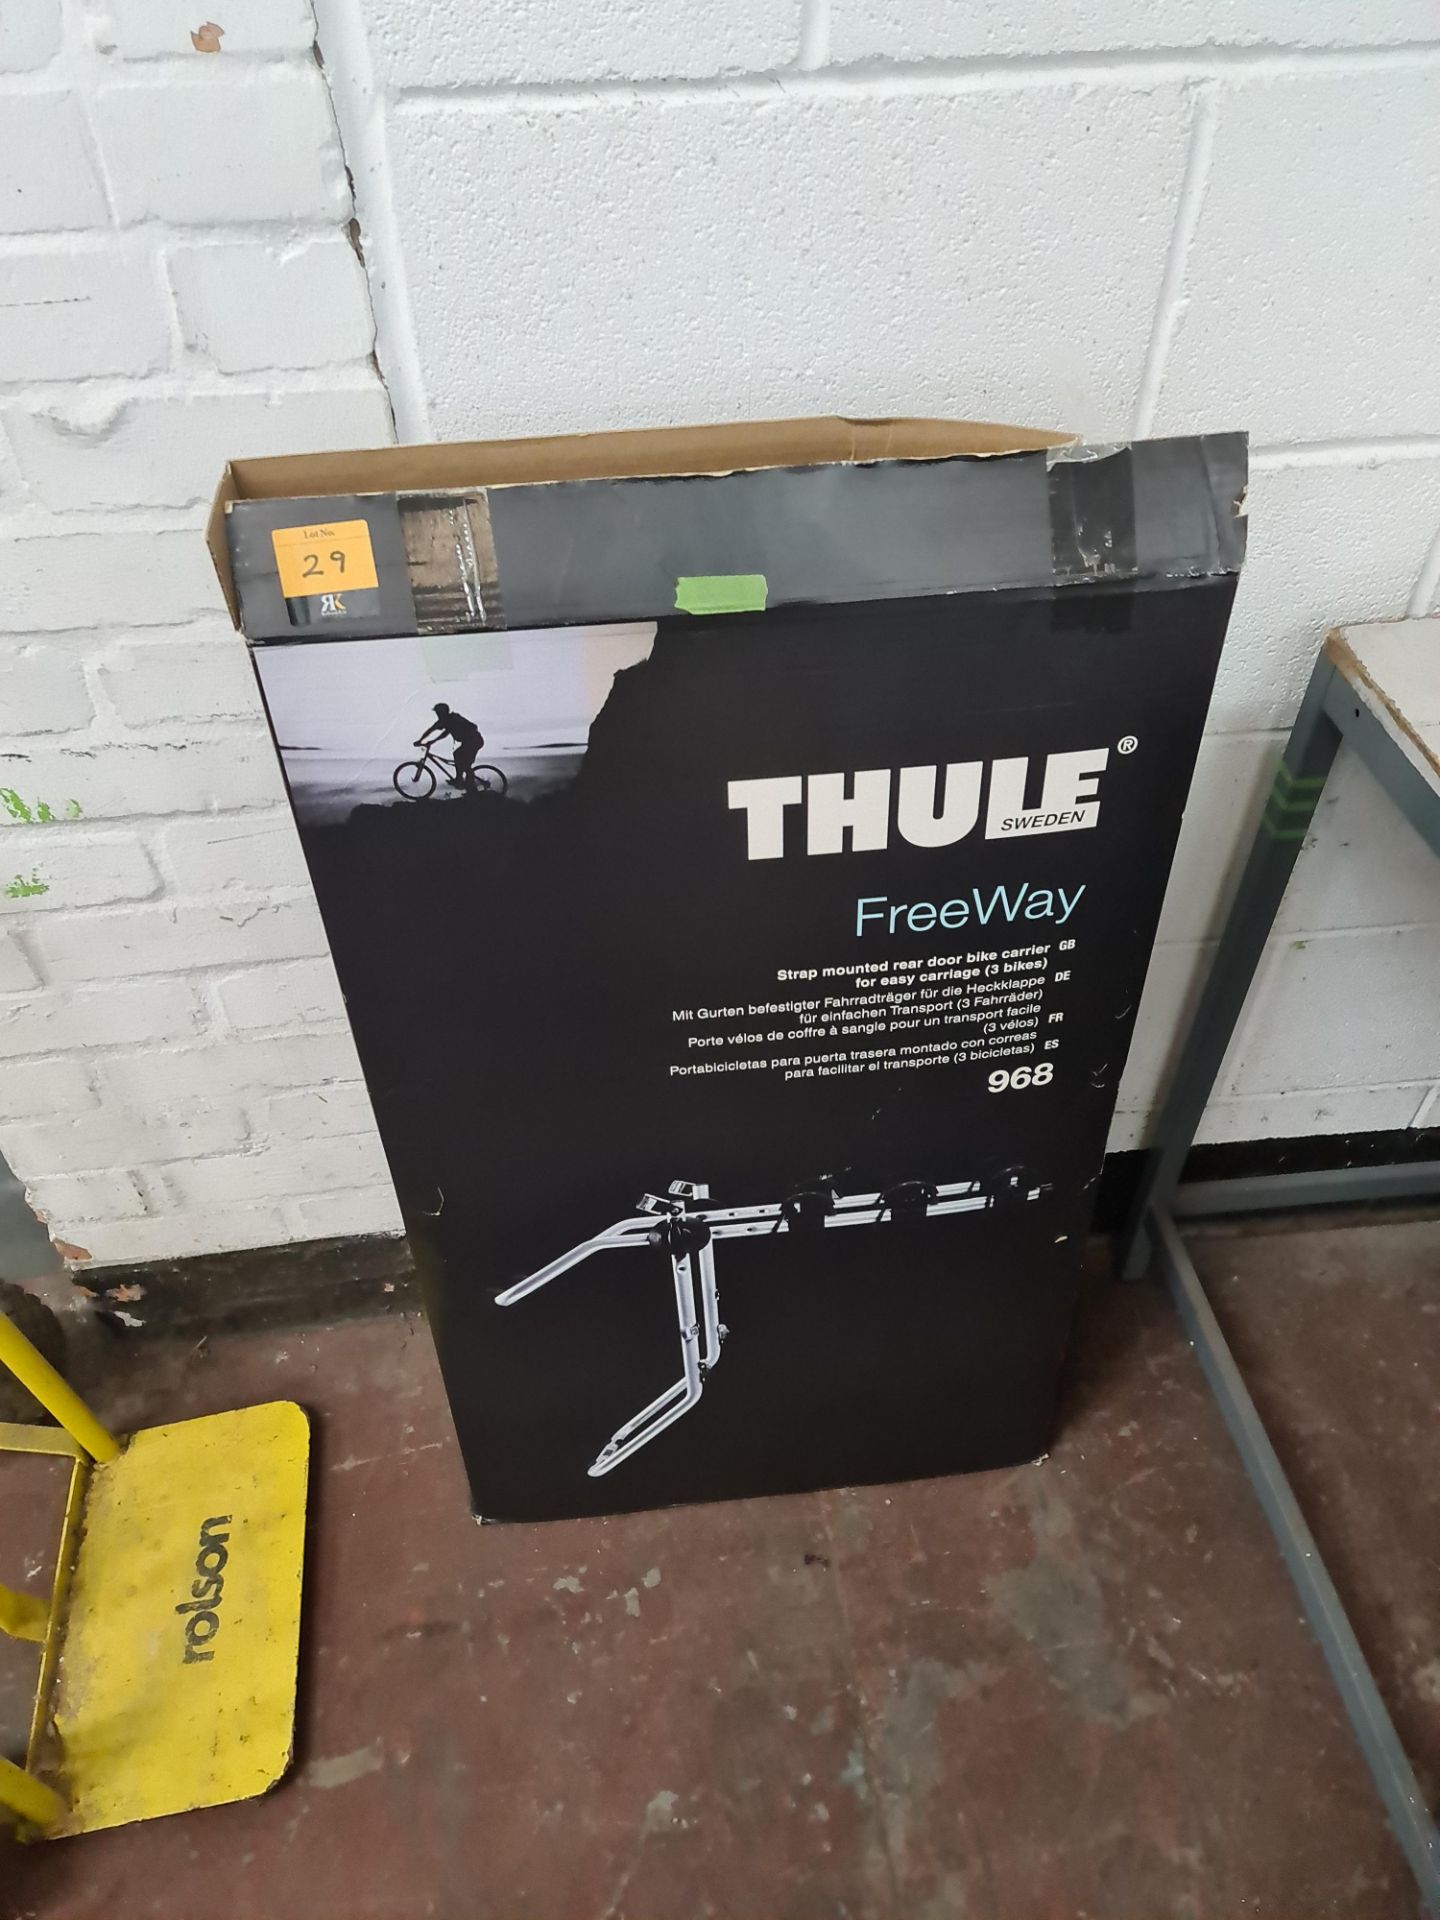 Thule FreeWay model 968 strap mounted rear door bike carrier for easy carriage of three bicycles